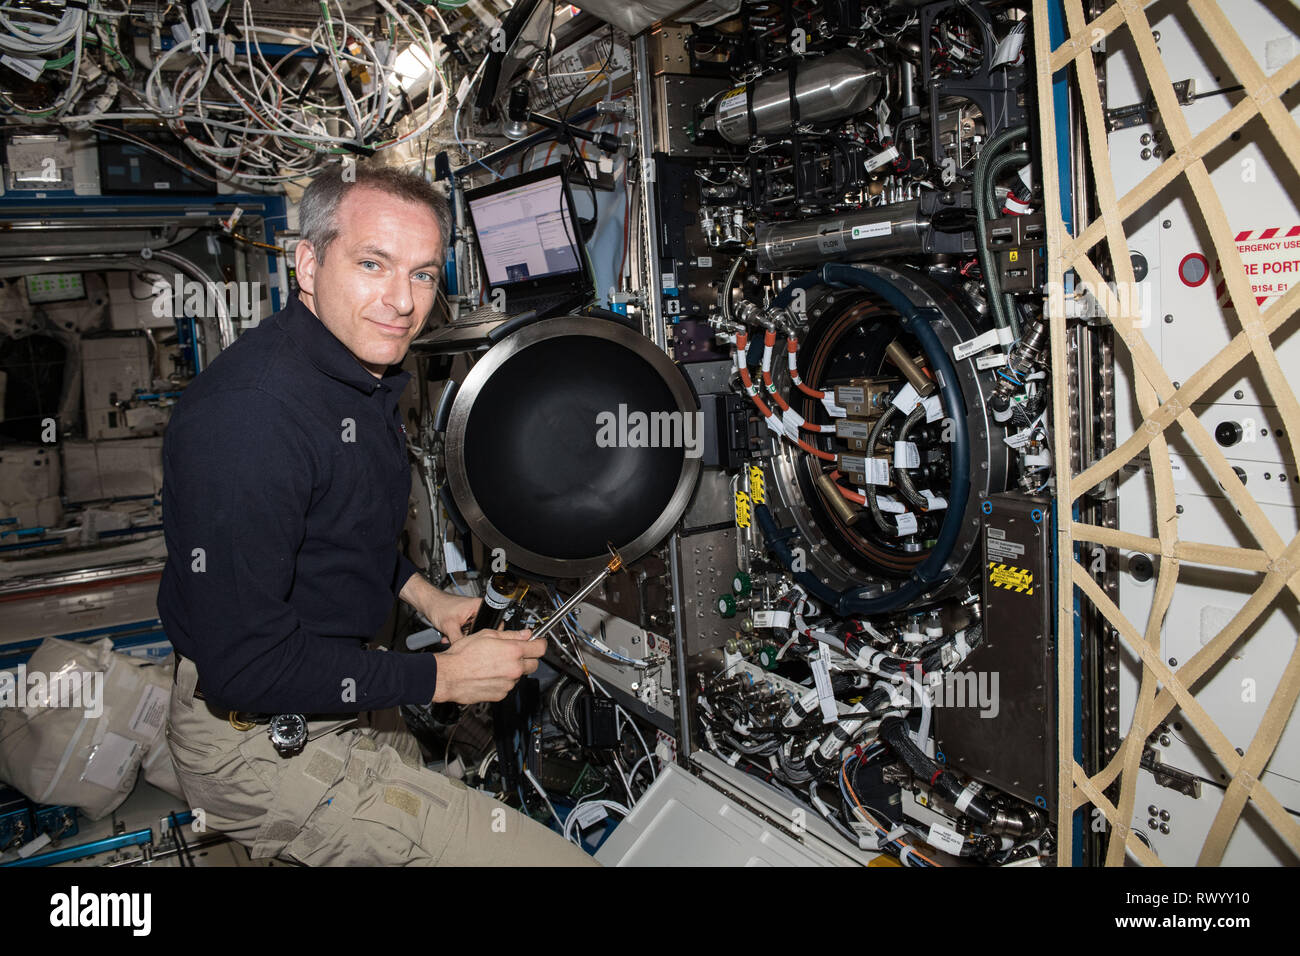 Canadian Space Agency astronaut David Saint-Jacques works inside the U.S. Destiny laboratory module working on the Combustion Integrated Rack aboard the International Space Station February 26, 2019 in Earth Orbit. Saint-Jacques replaced fuel flow controllers inside the device for the Advanced Combustion via Microgravity Experiments which are a set of five independent studies of gaseous flames. Stock Photo